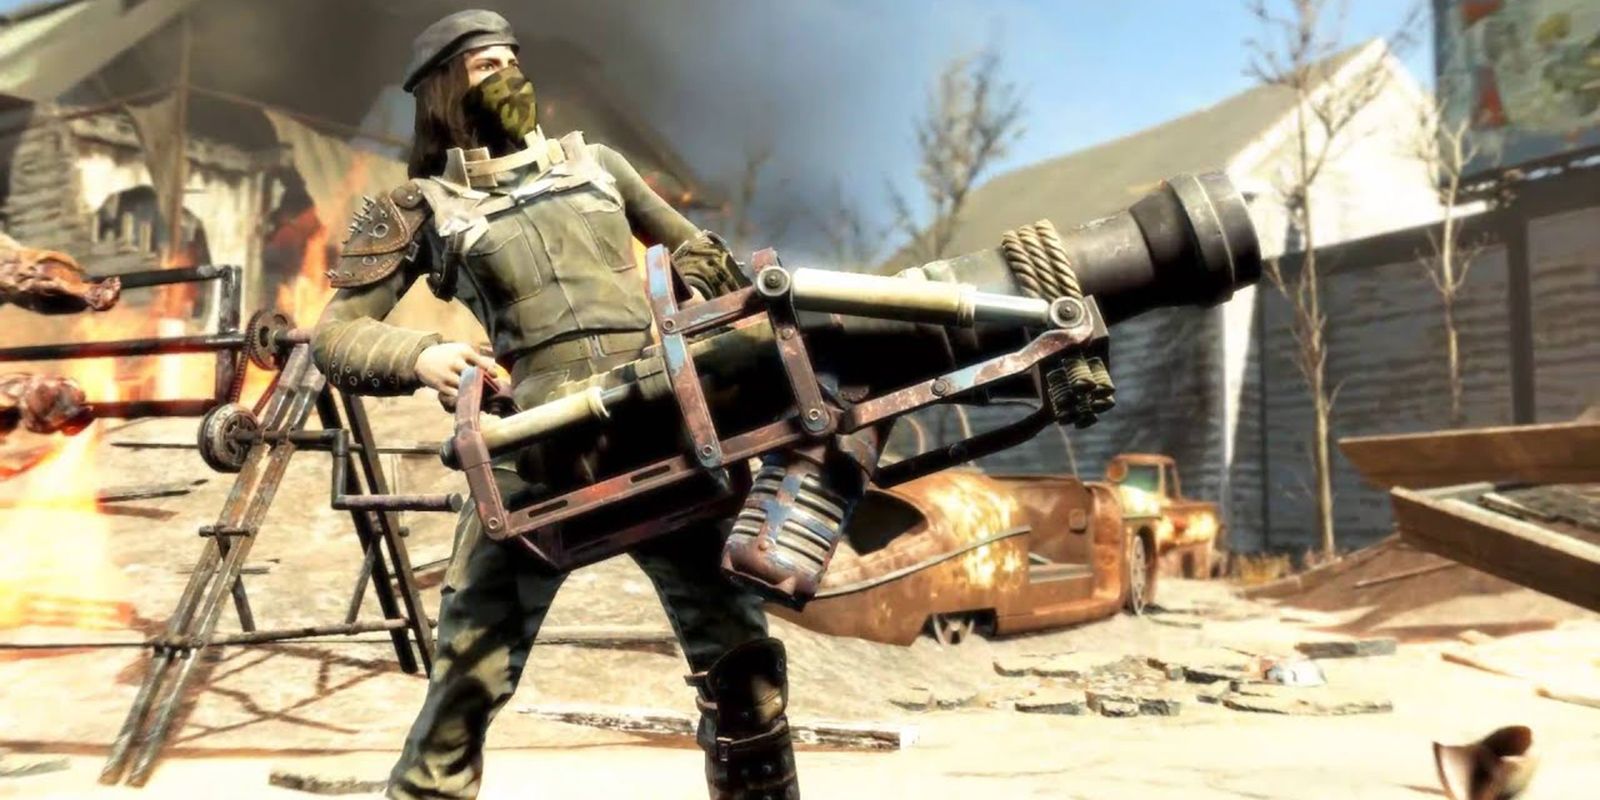 A character wielding the Broadsider weapon in Fallout 4